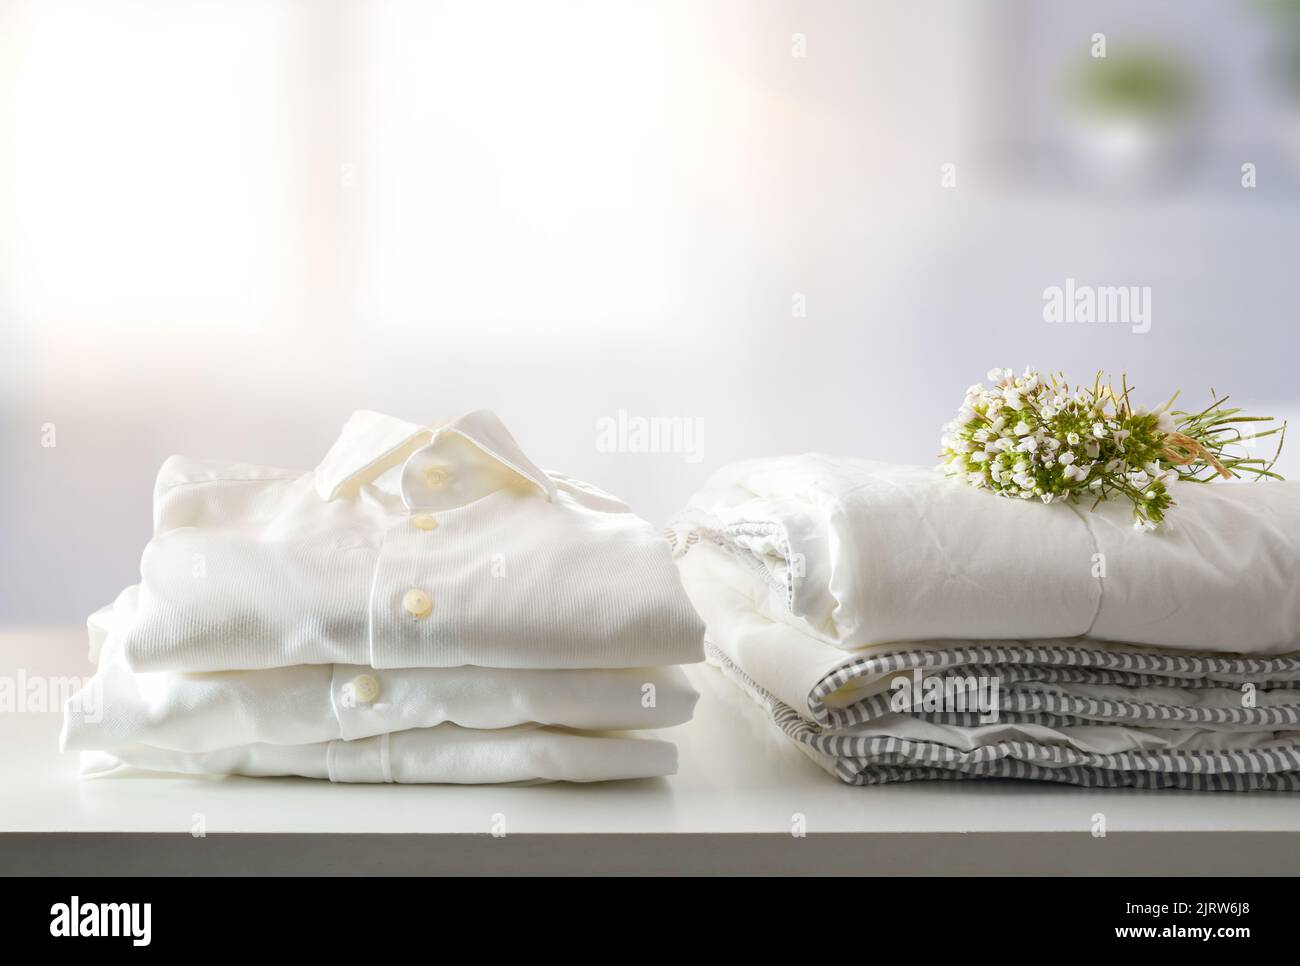 Clean white freshly washed and folded bed and dress clothes on white shelf in bedroom. Front view. Horizontal composition. Stock Photo